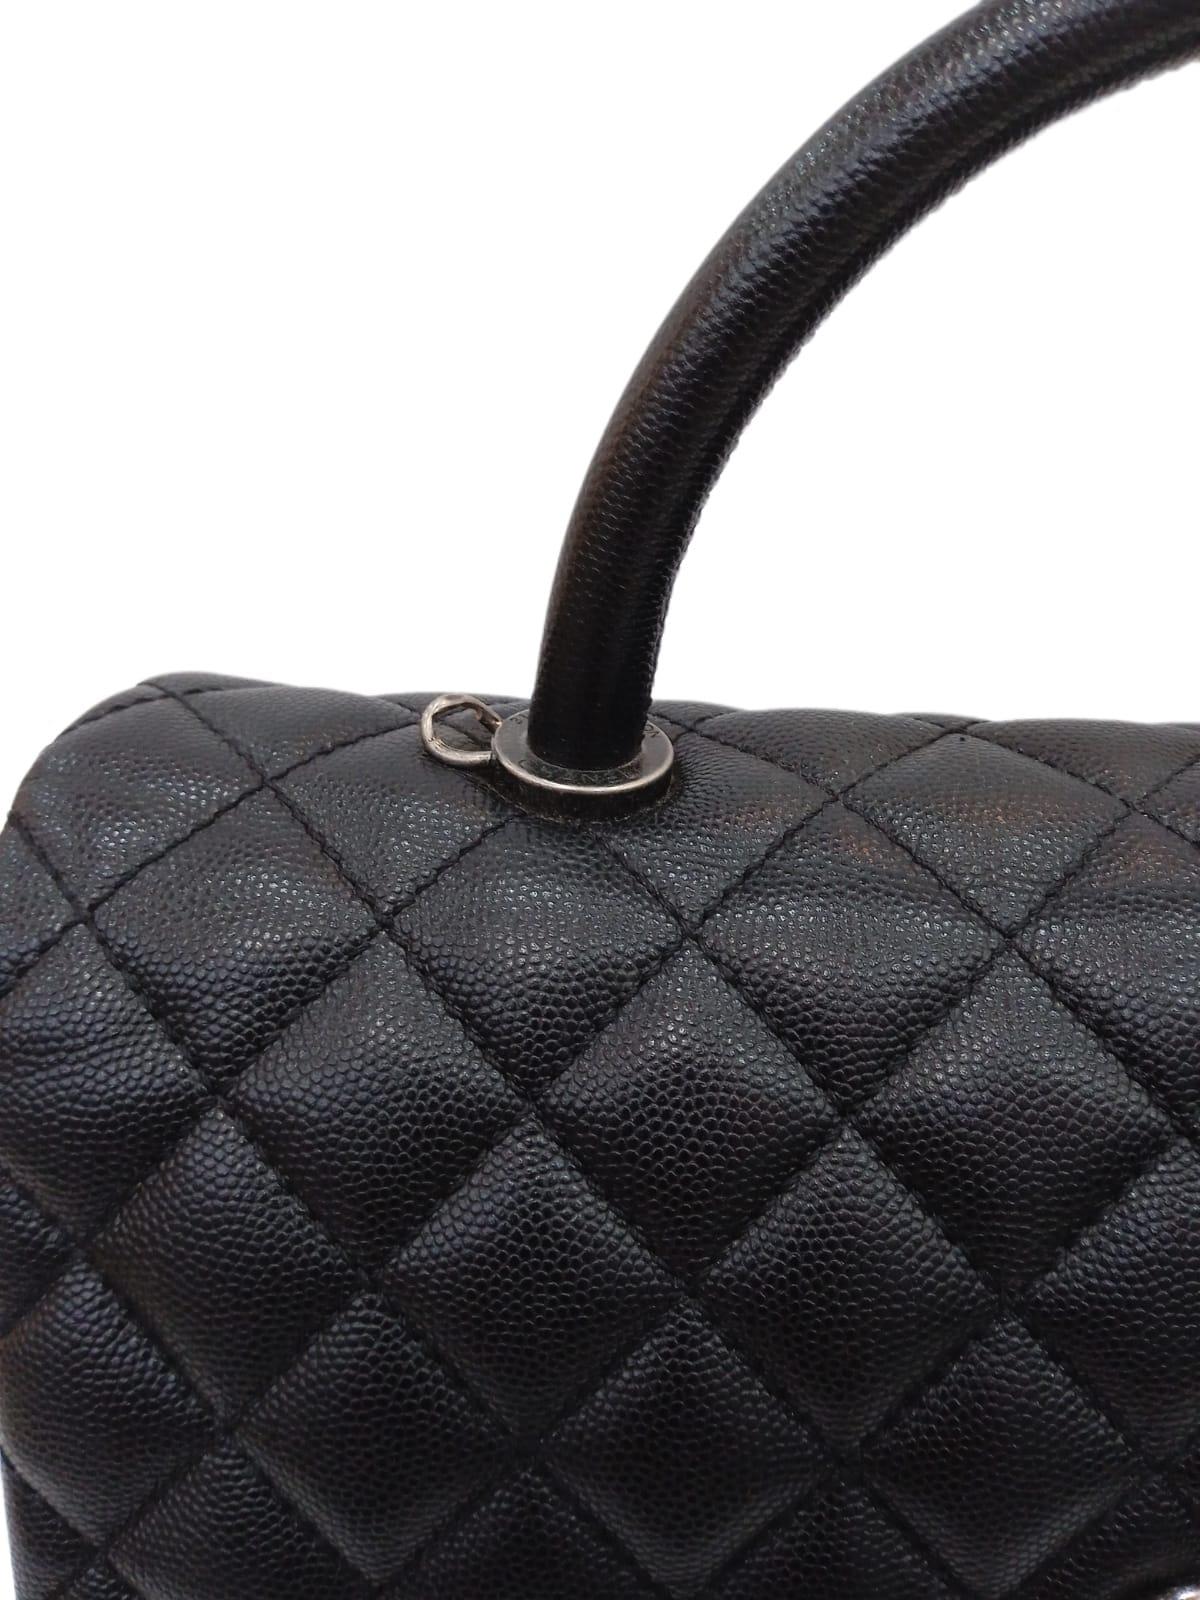 Chanel Black Caviar Quilted Large Coco Handle SHW Bag 11